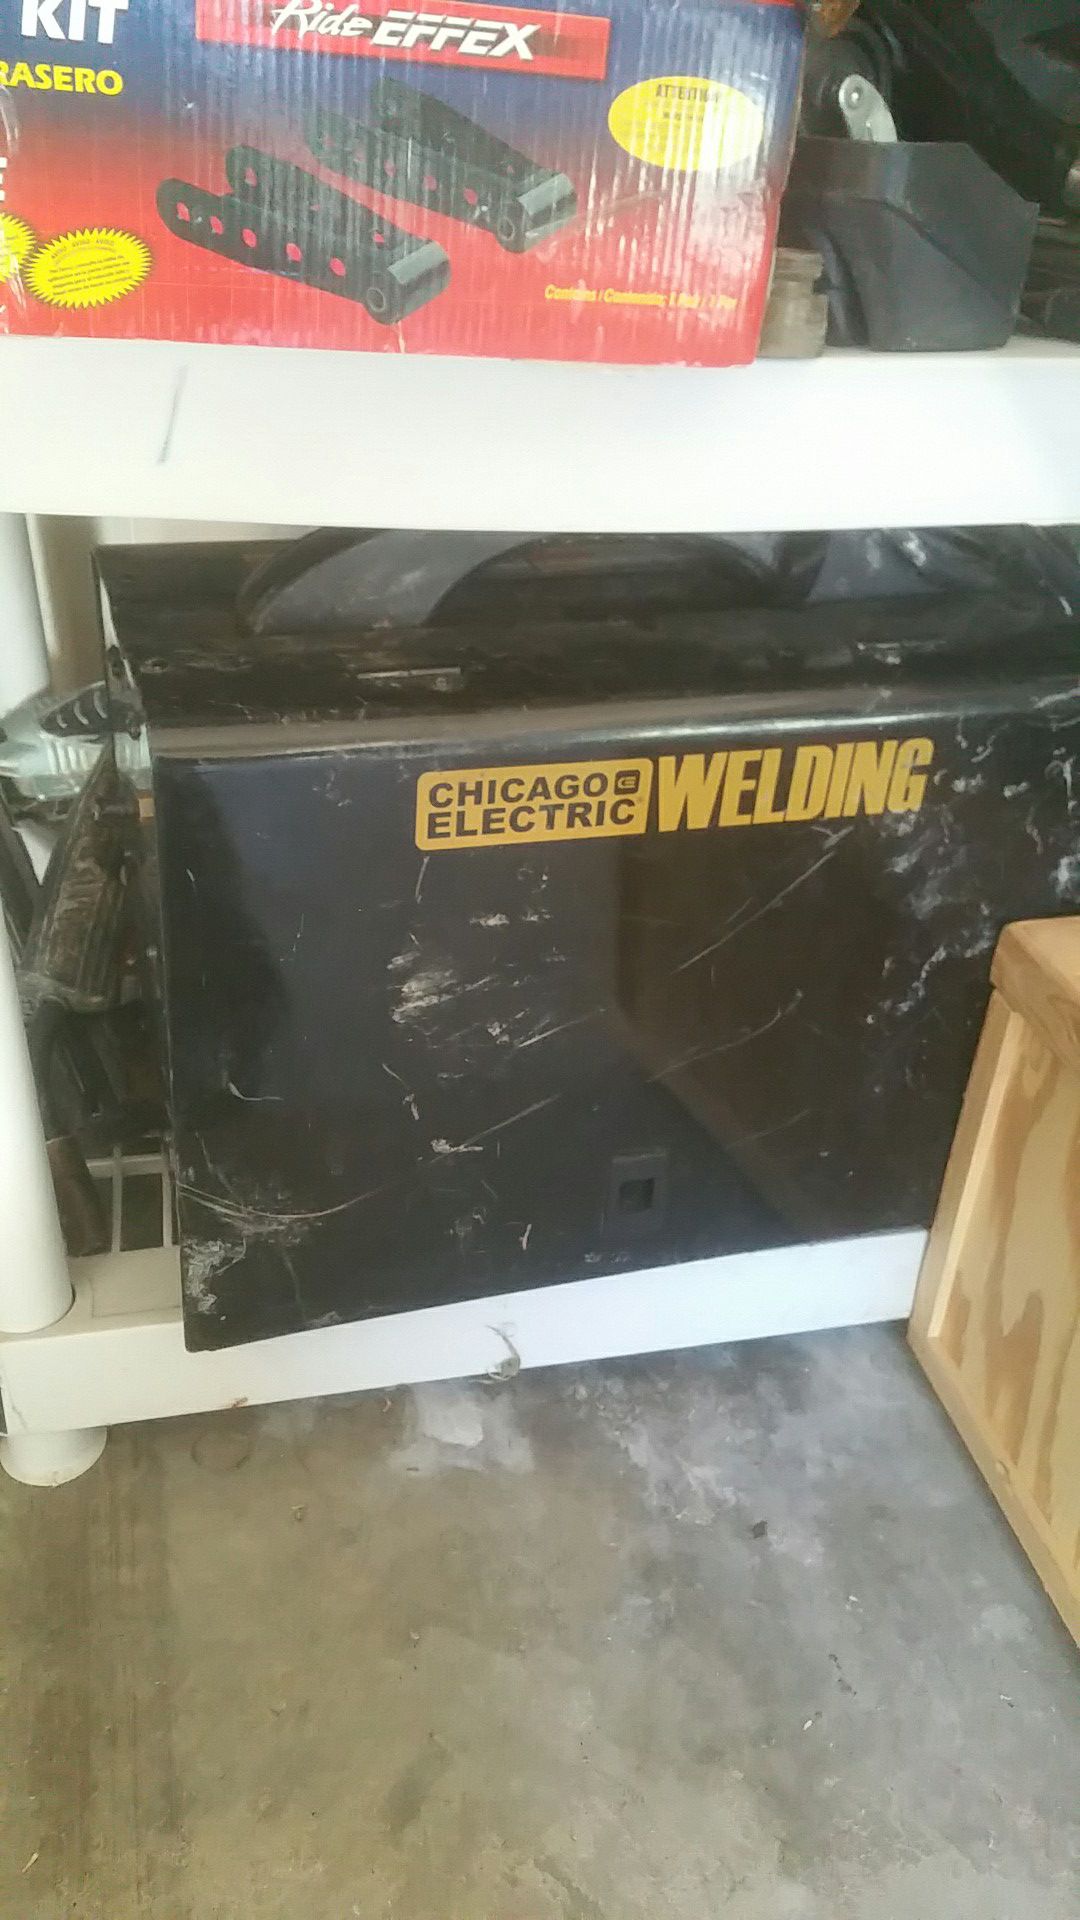 Used welder comes with everything